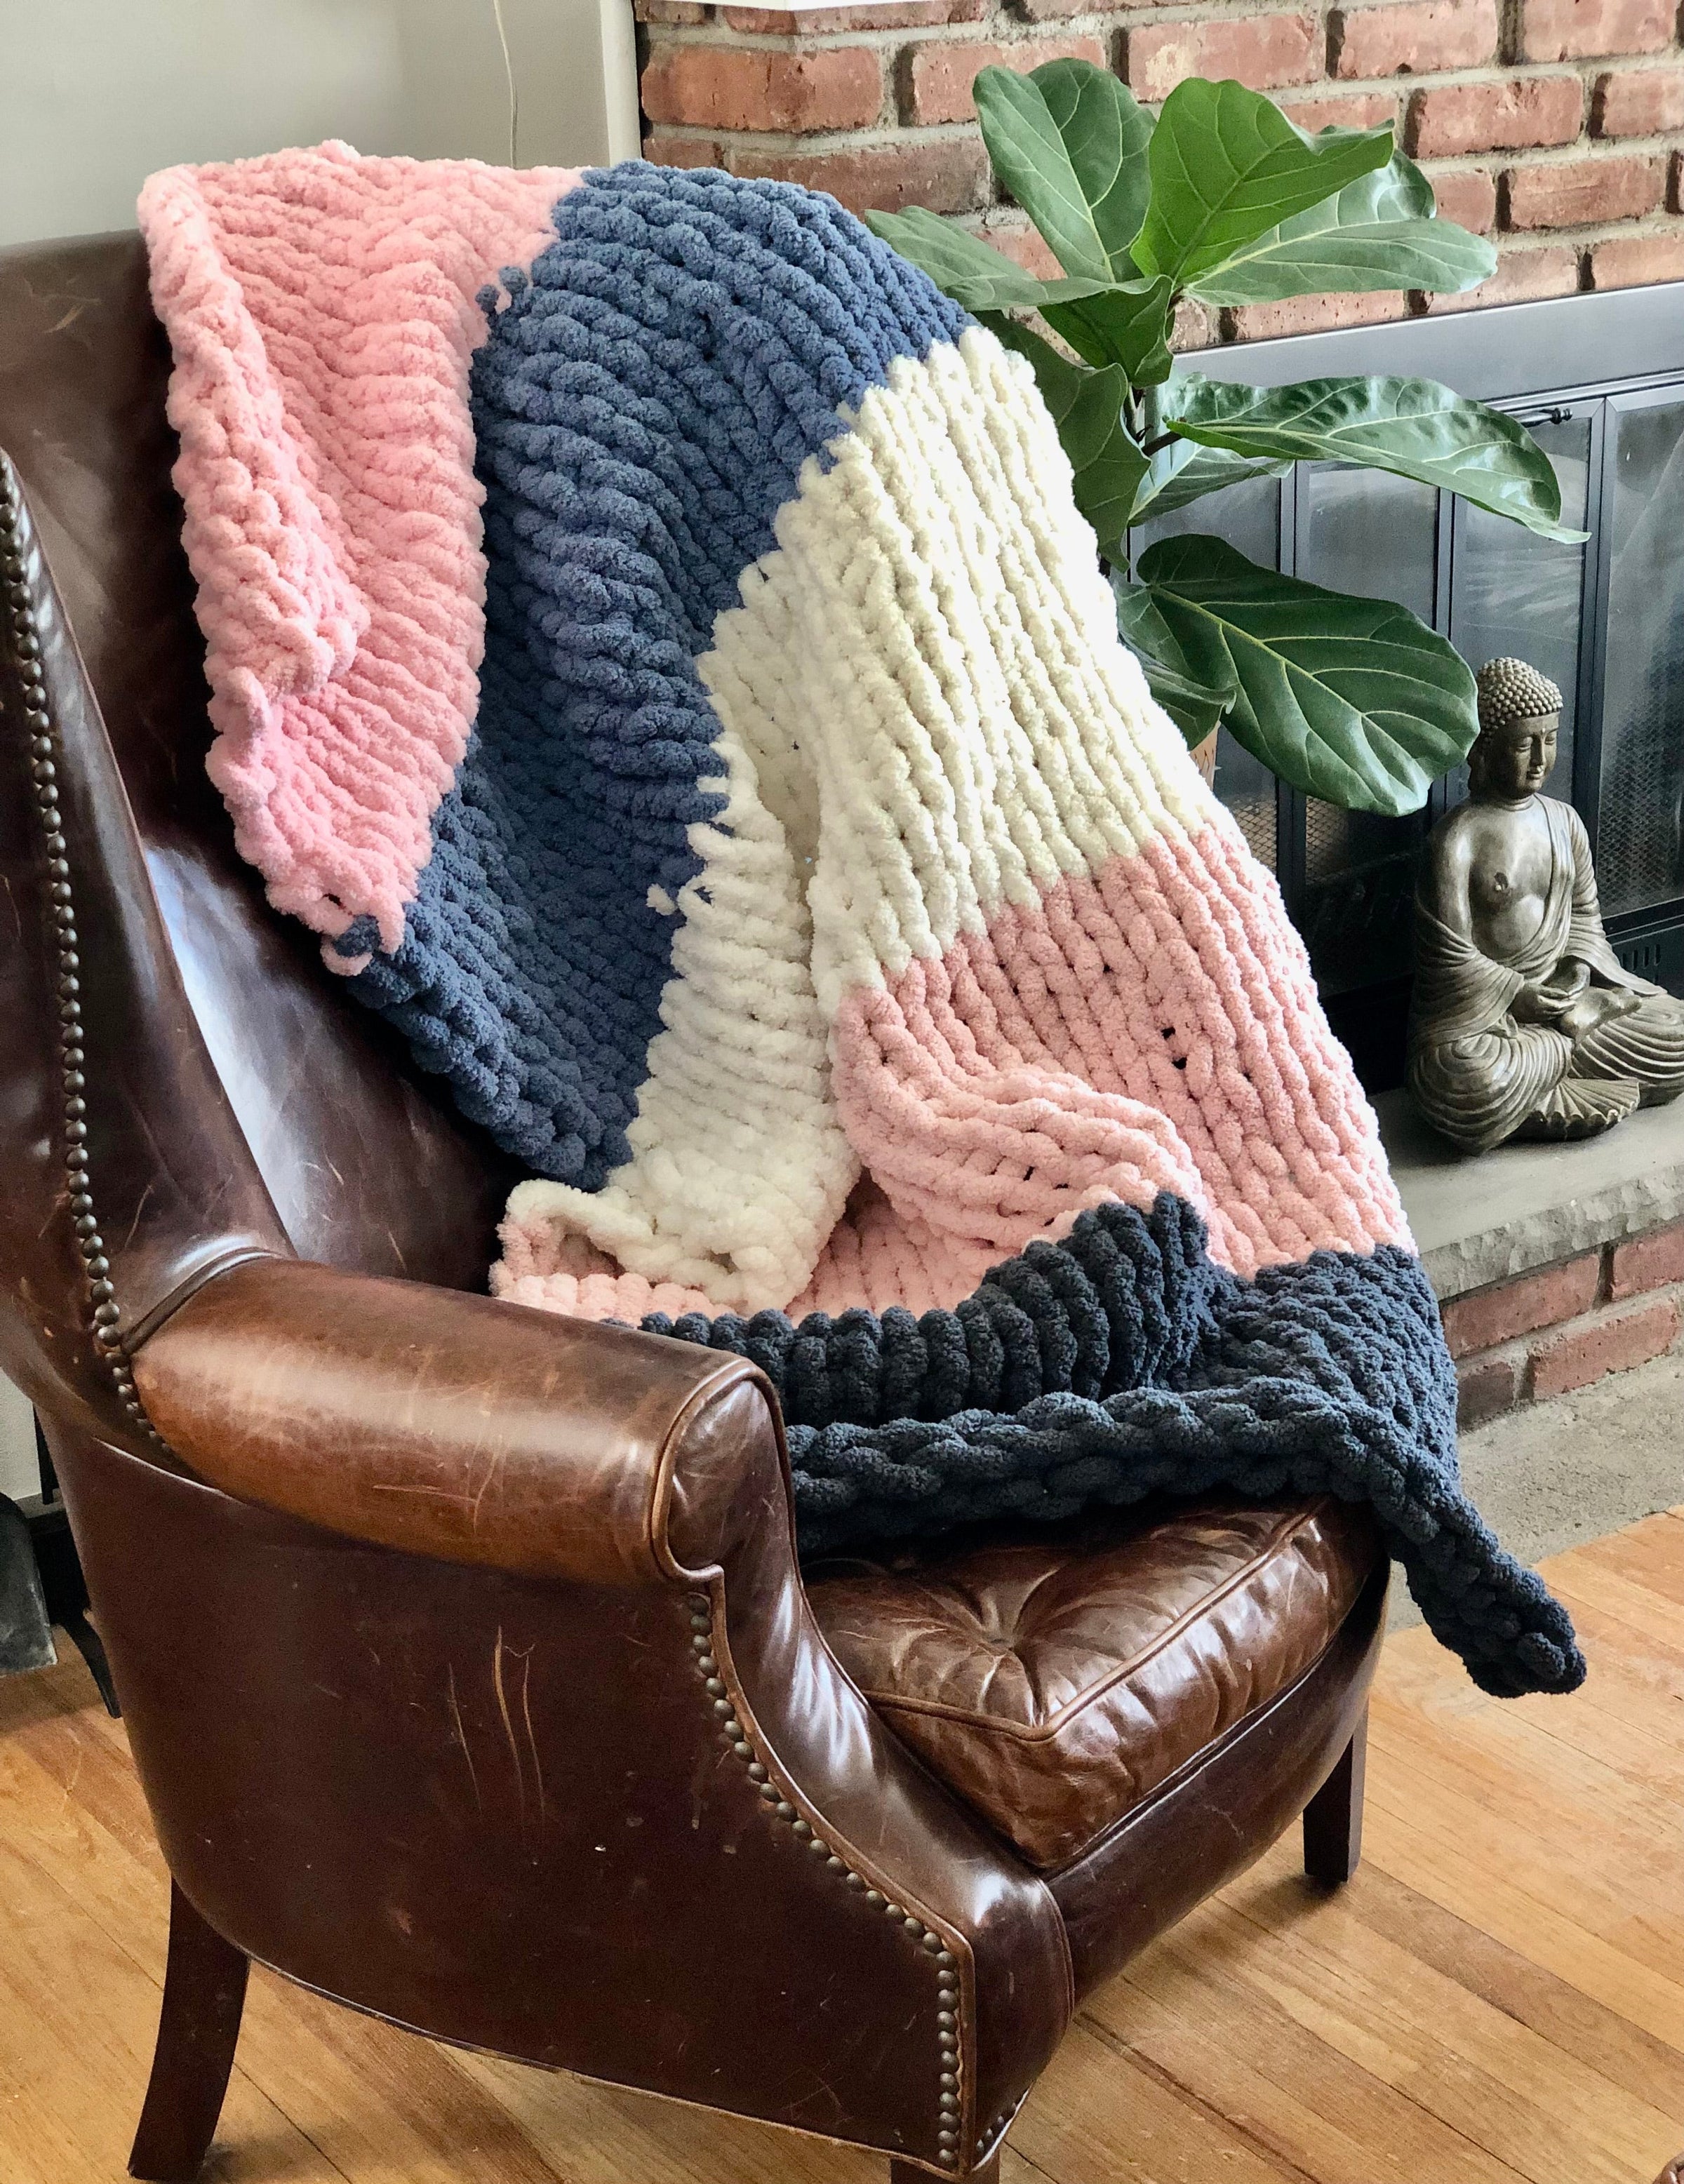 How to Make a Chunky Knit Blanket After You Fail at Arm Knitting